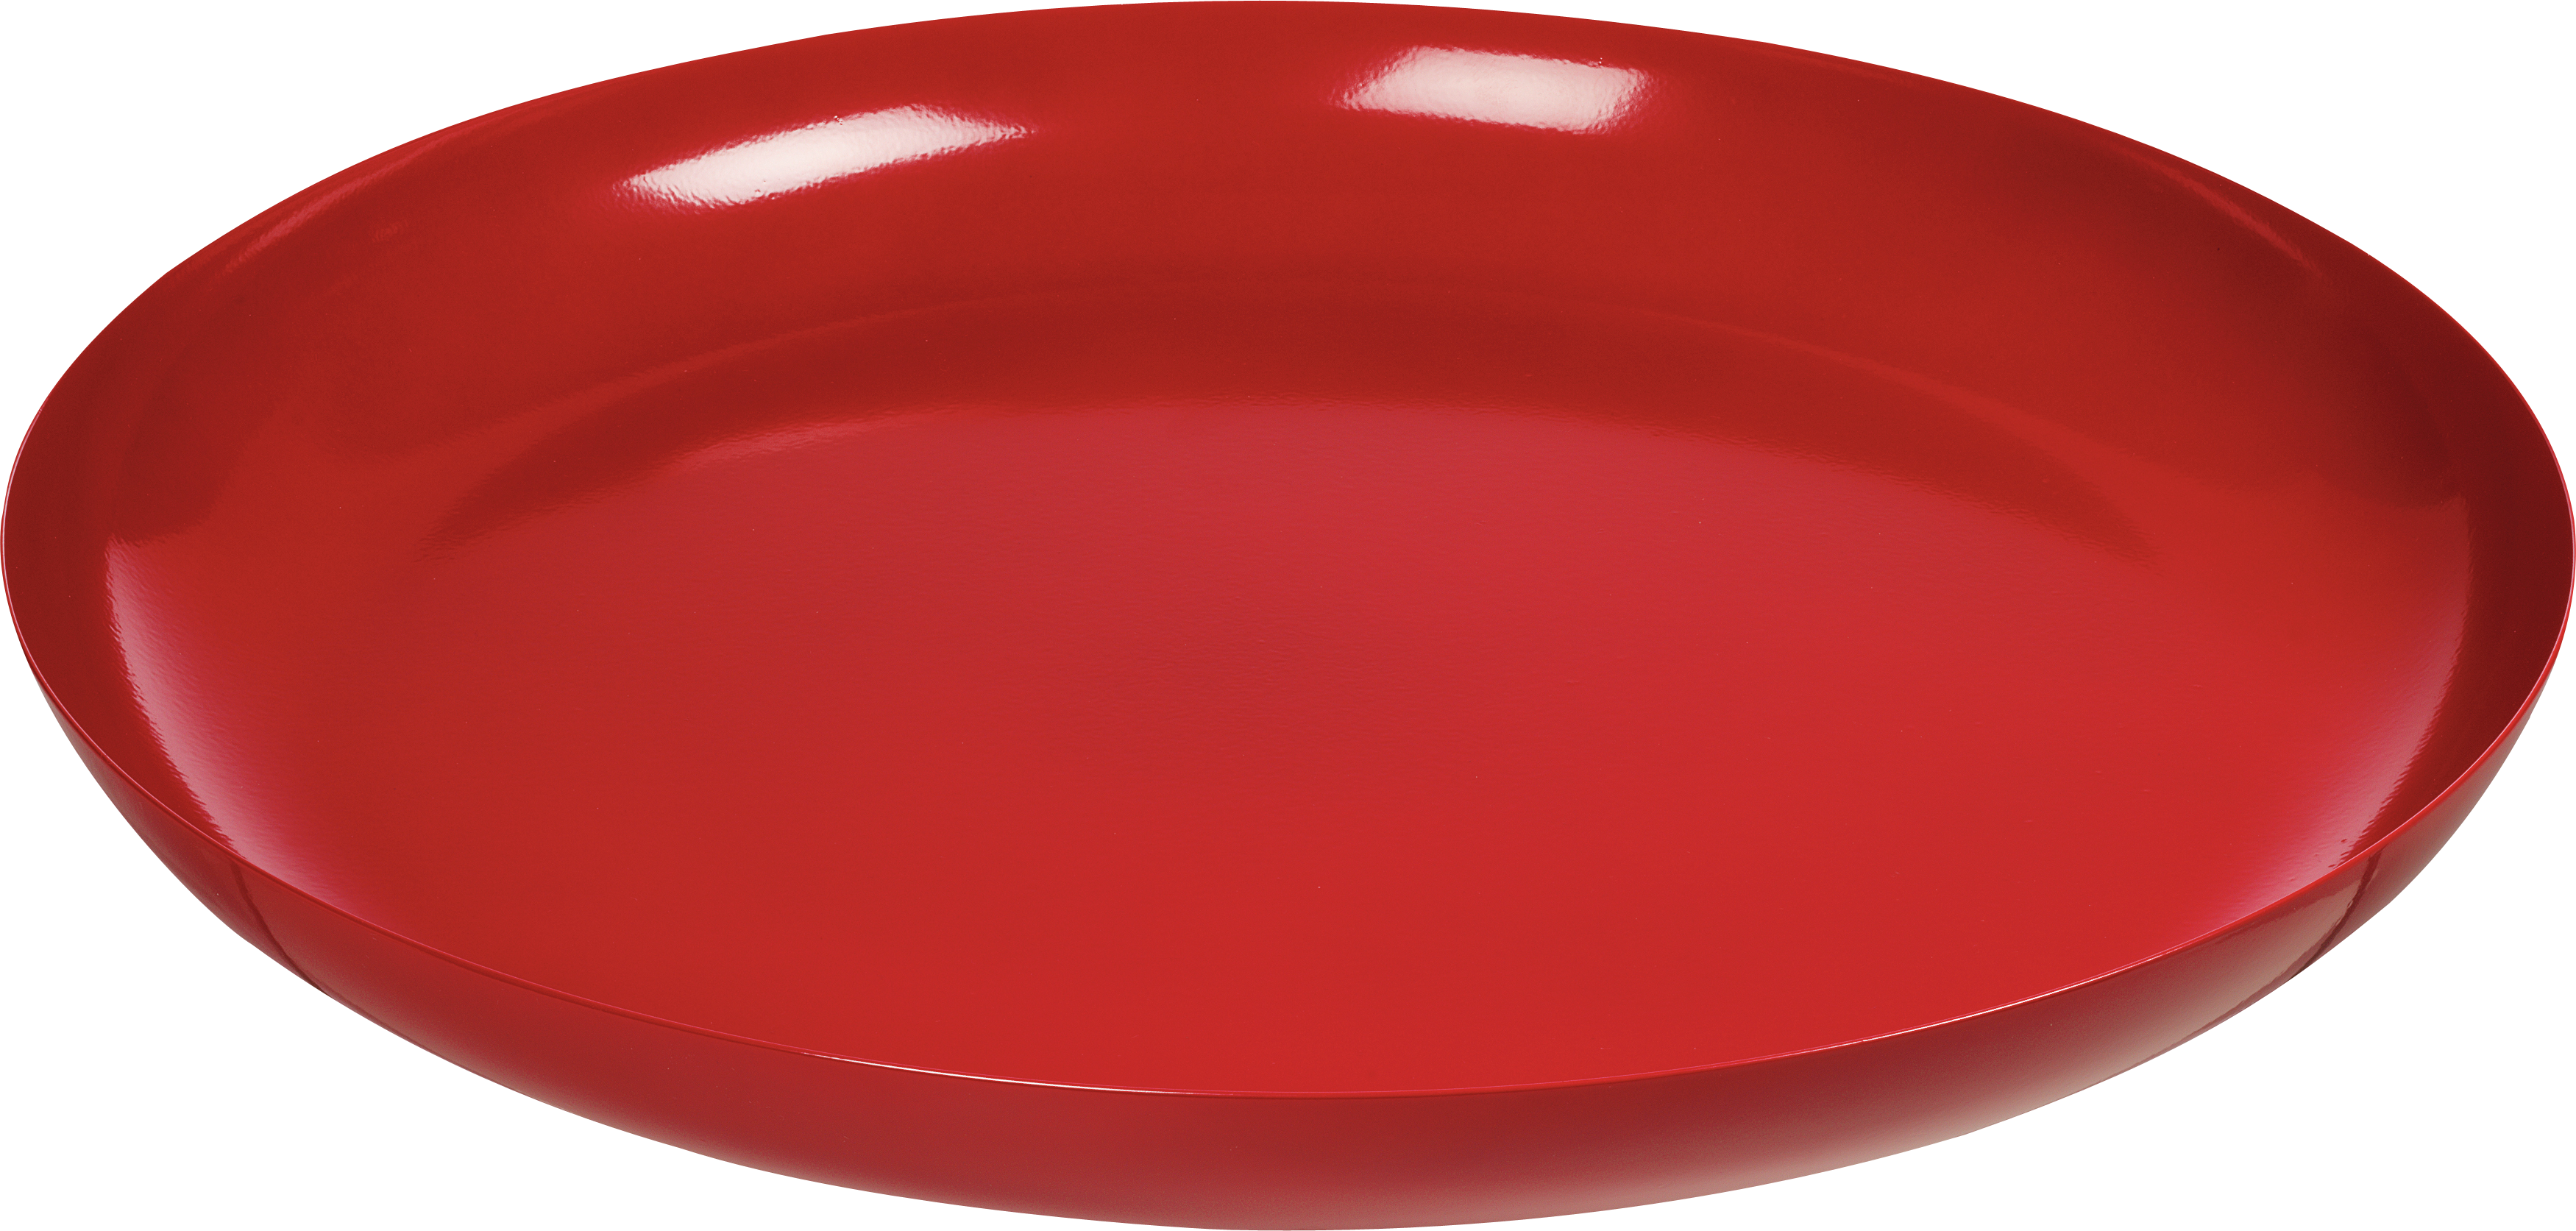 Red Plate Png Image - Plate, Transparent background PNG HD thumbnail